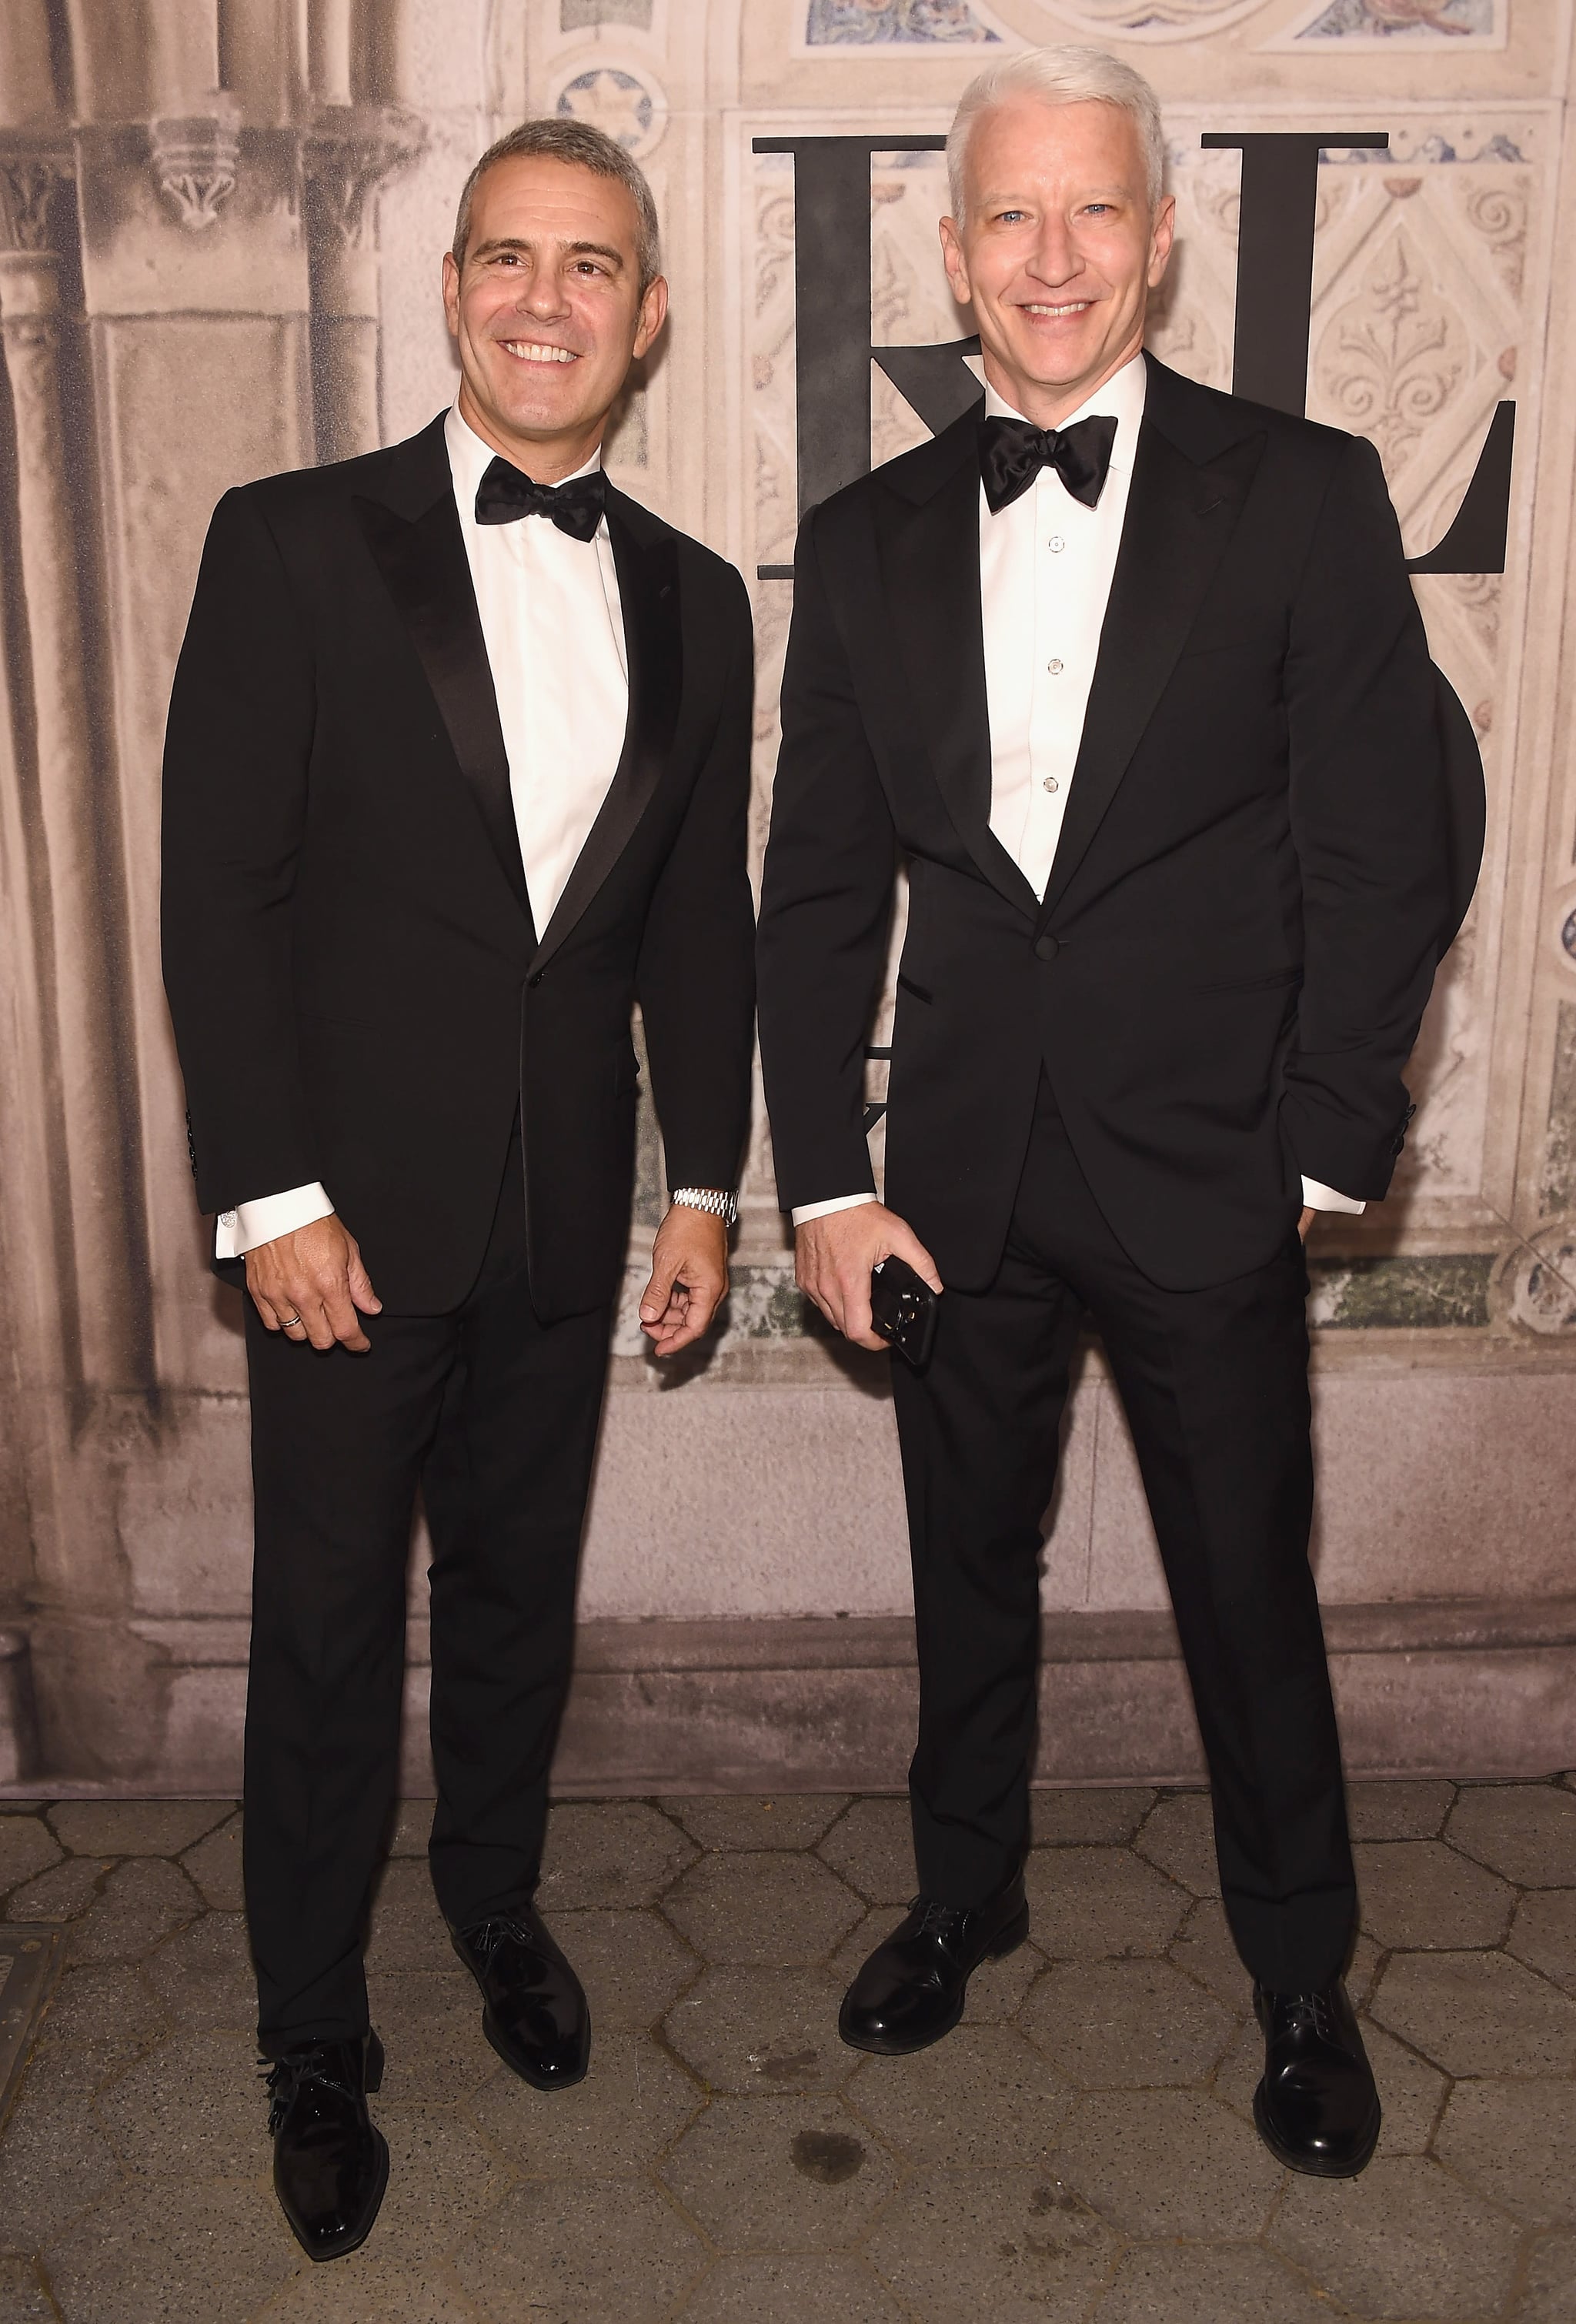 Andy Cohen and Anderson Cooper | Stars Hit the Red Carpet in Style to  Celebrate Ralph Lauren's Milestone Anniversary | POPSUGAR Celebrity Photo 10